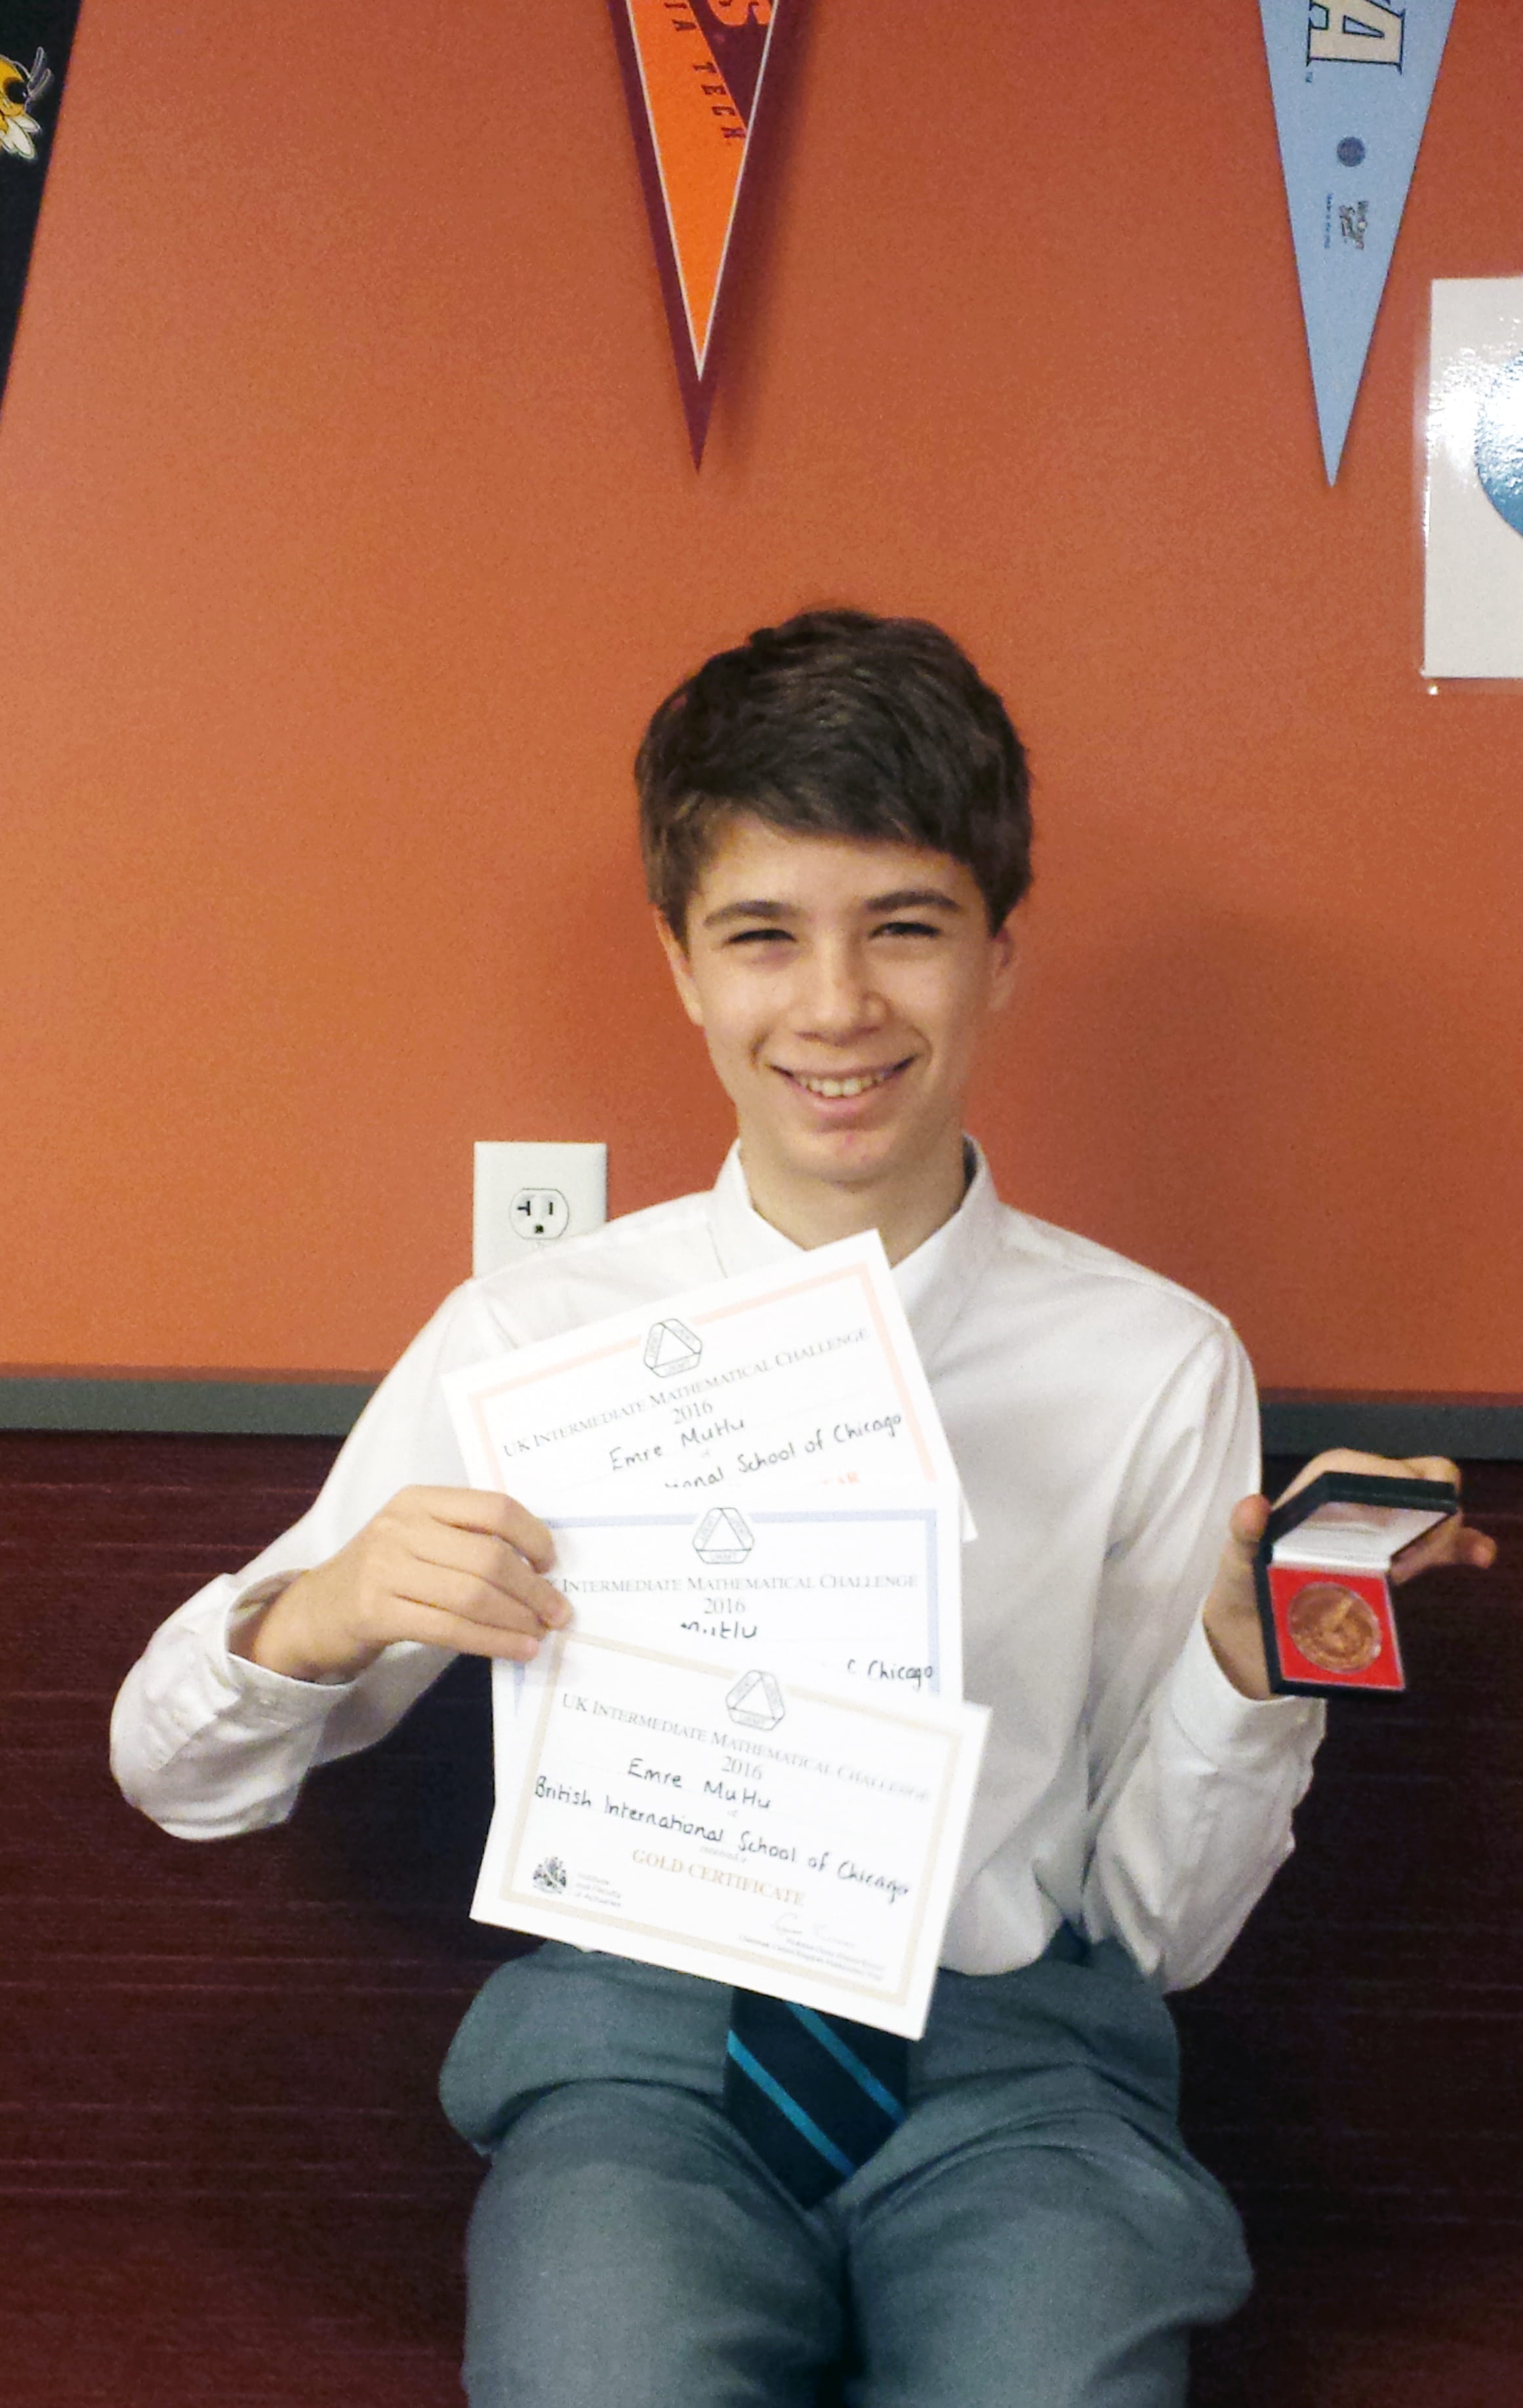 Student Lands in Top 100 for Global Math Contest - student-lands-in-top-100-for-global-math-contest